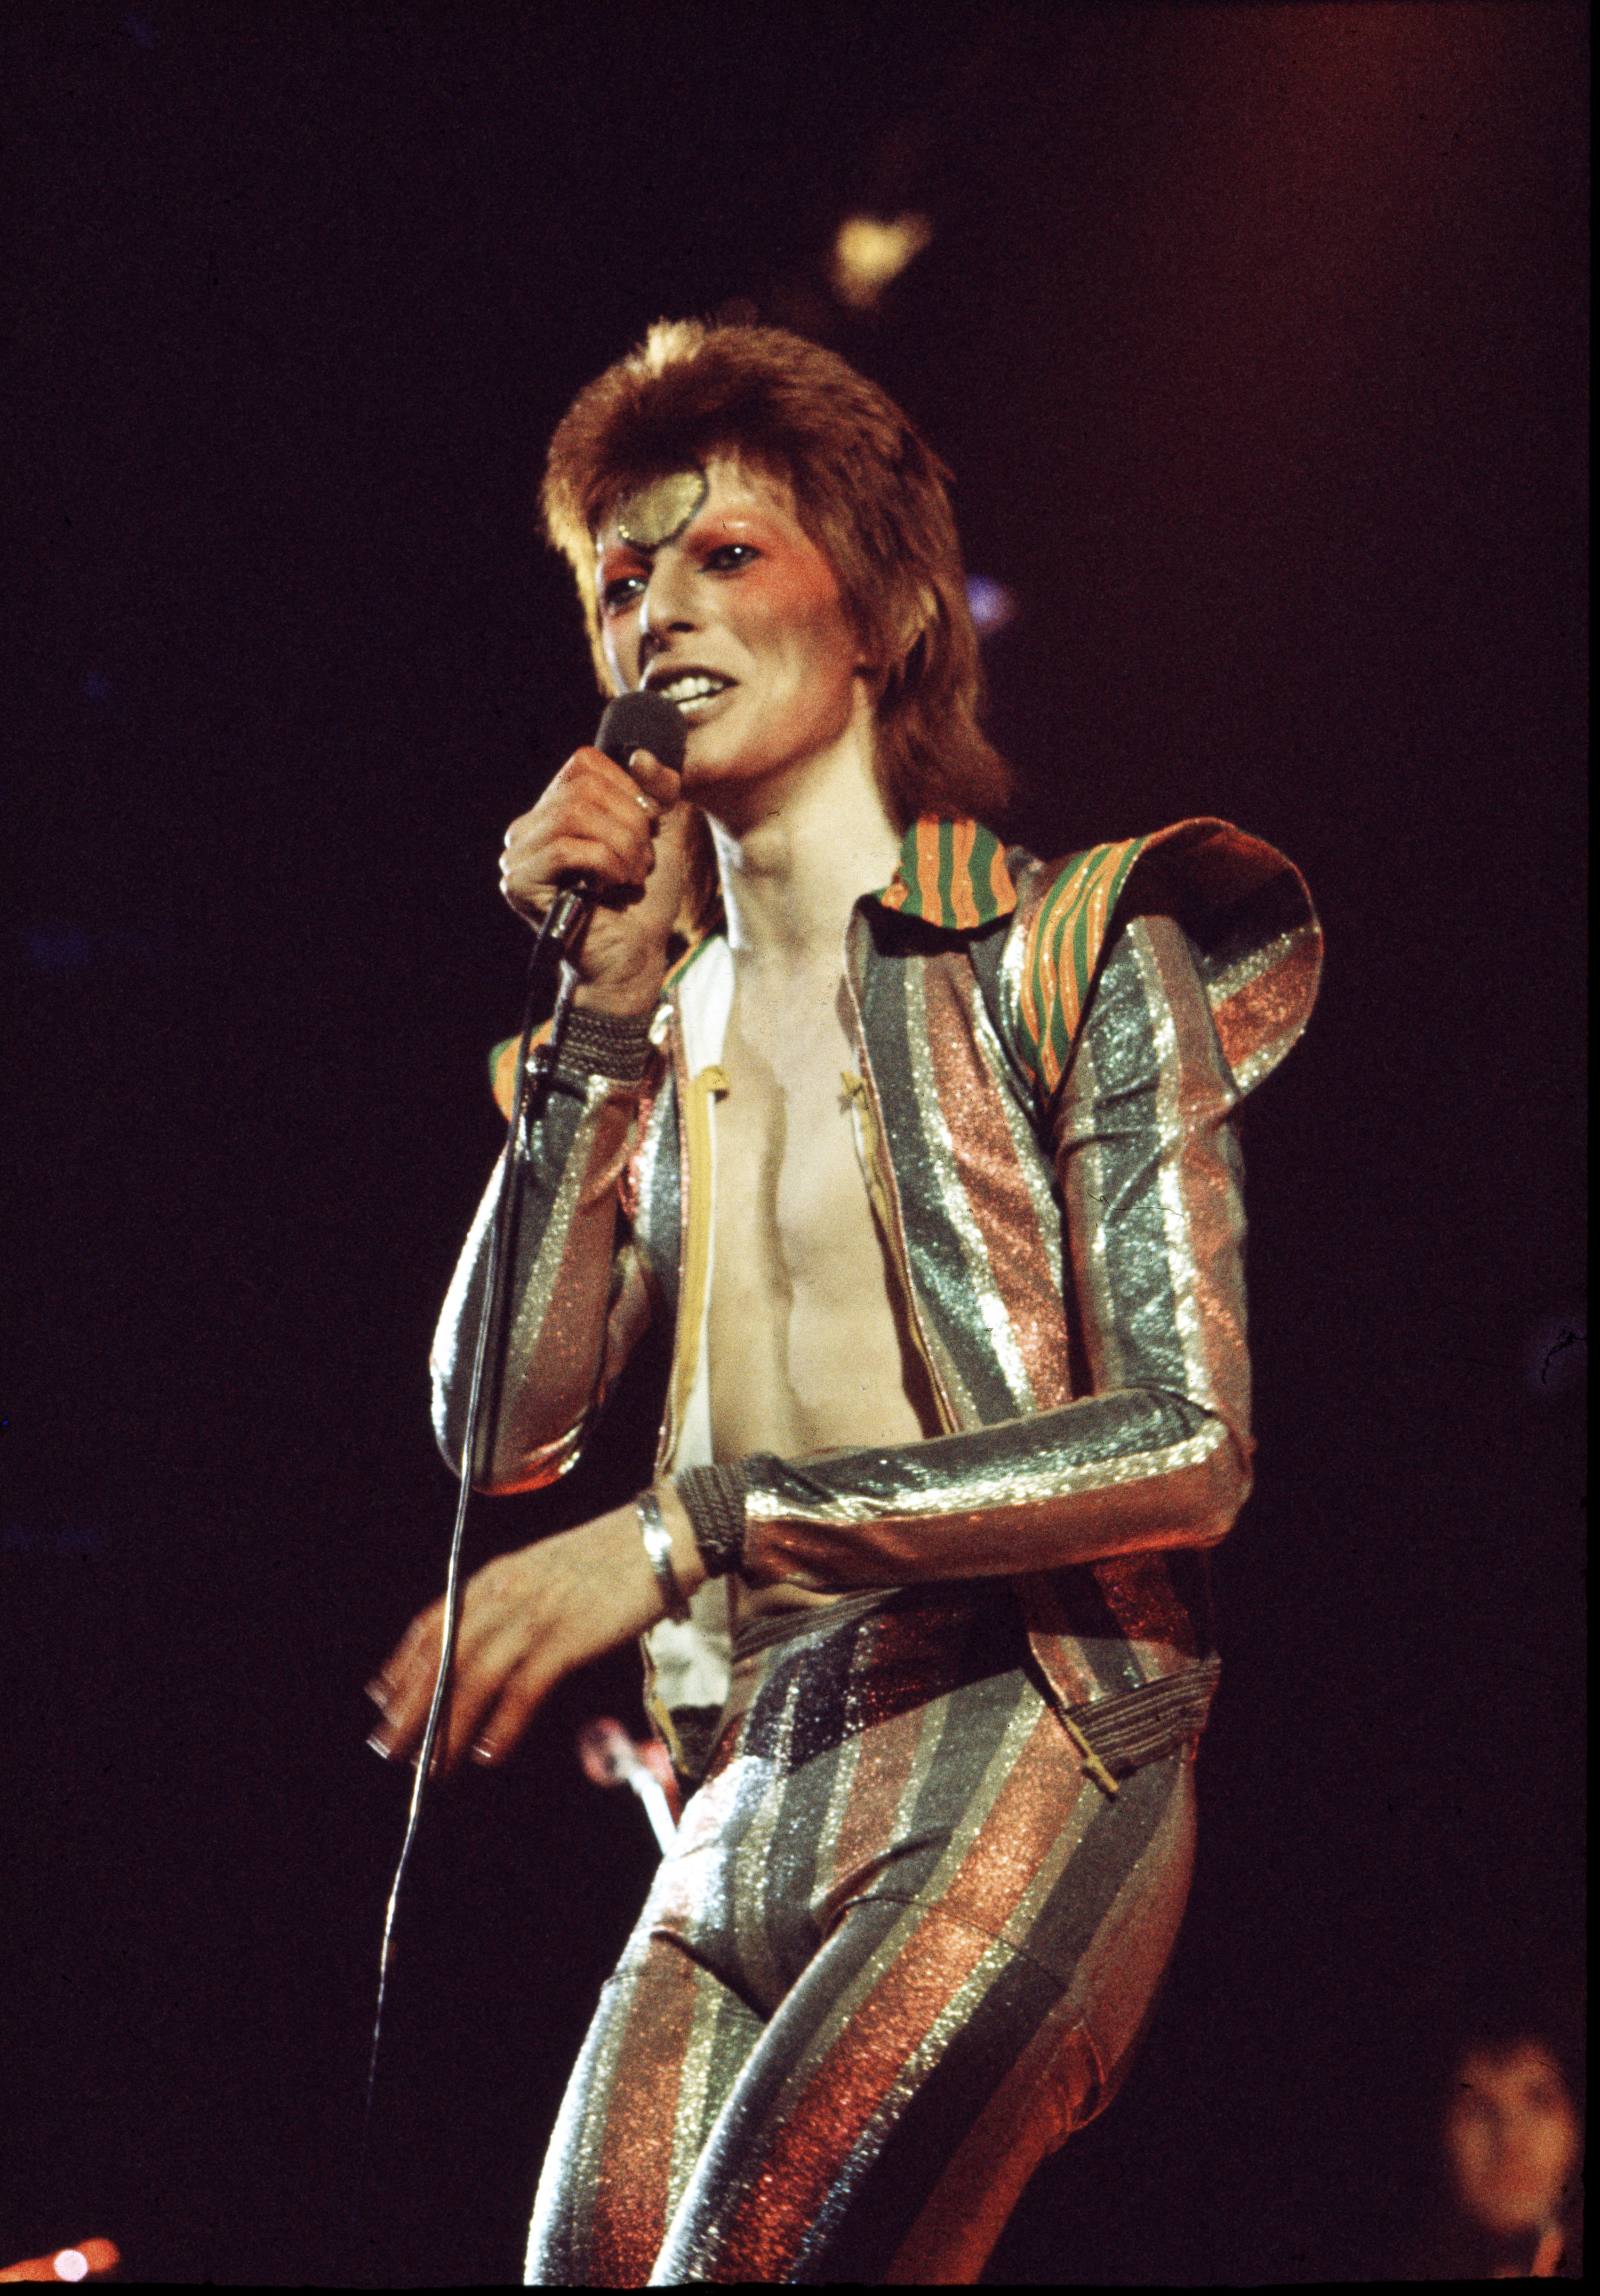 David Bowie performs on stage on Ziggy Stardust/Aladdin Sane tour in London 1973